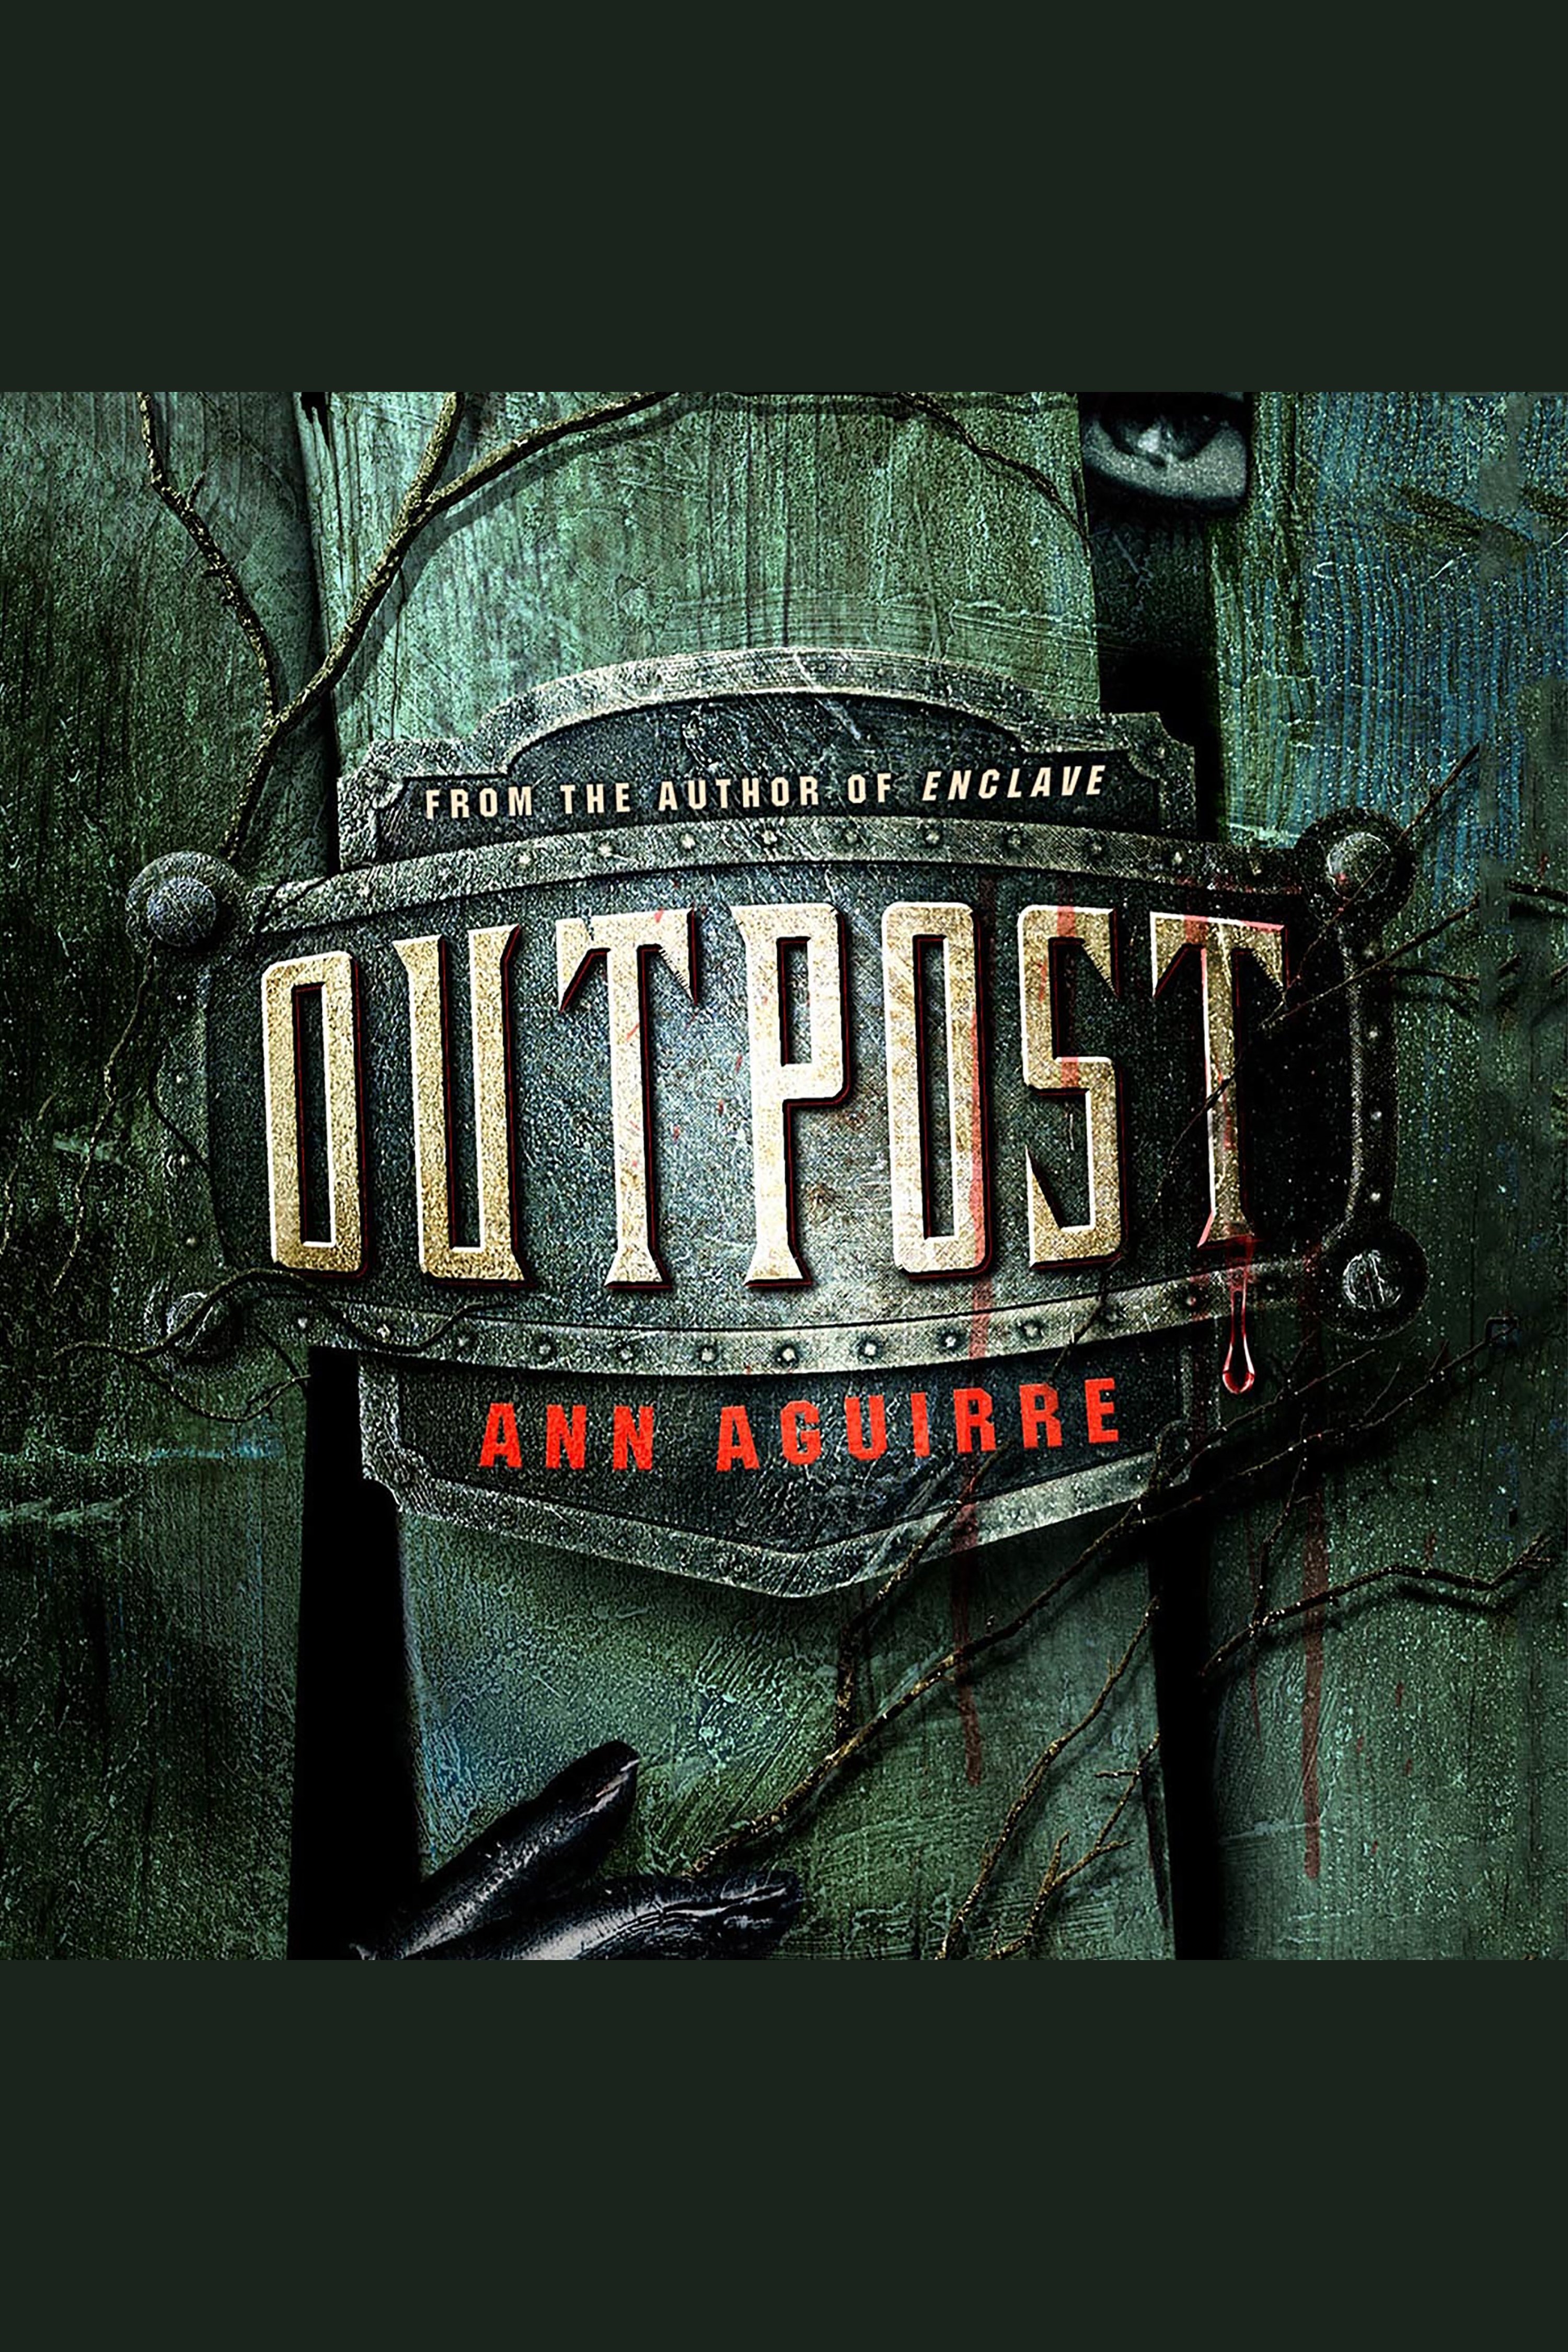 Outpost cover image